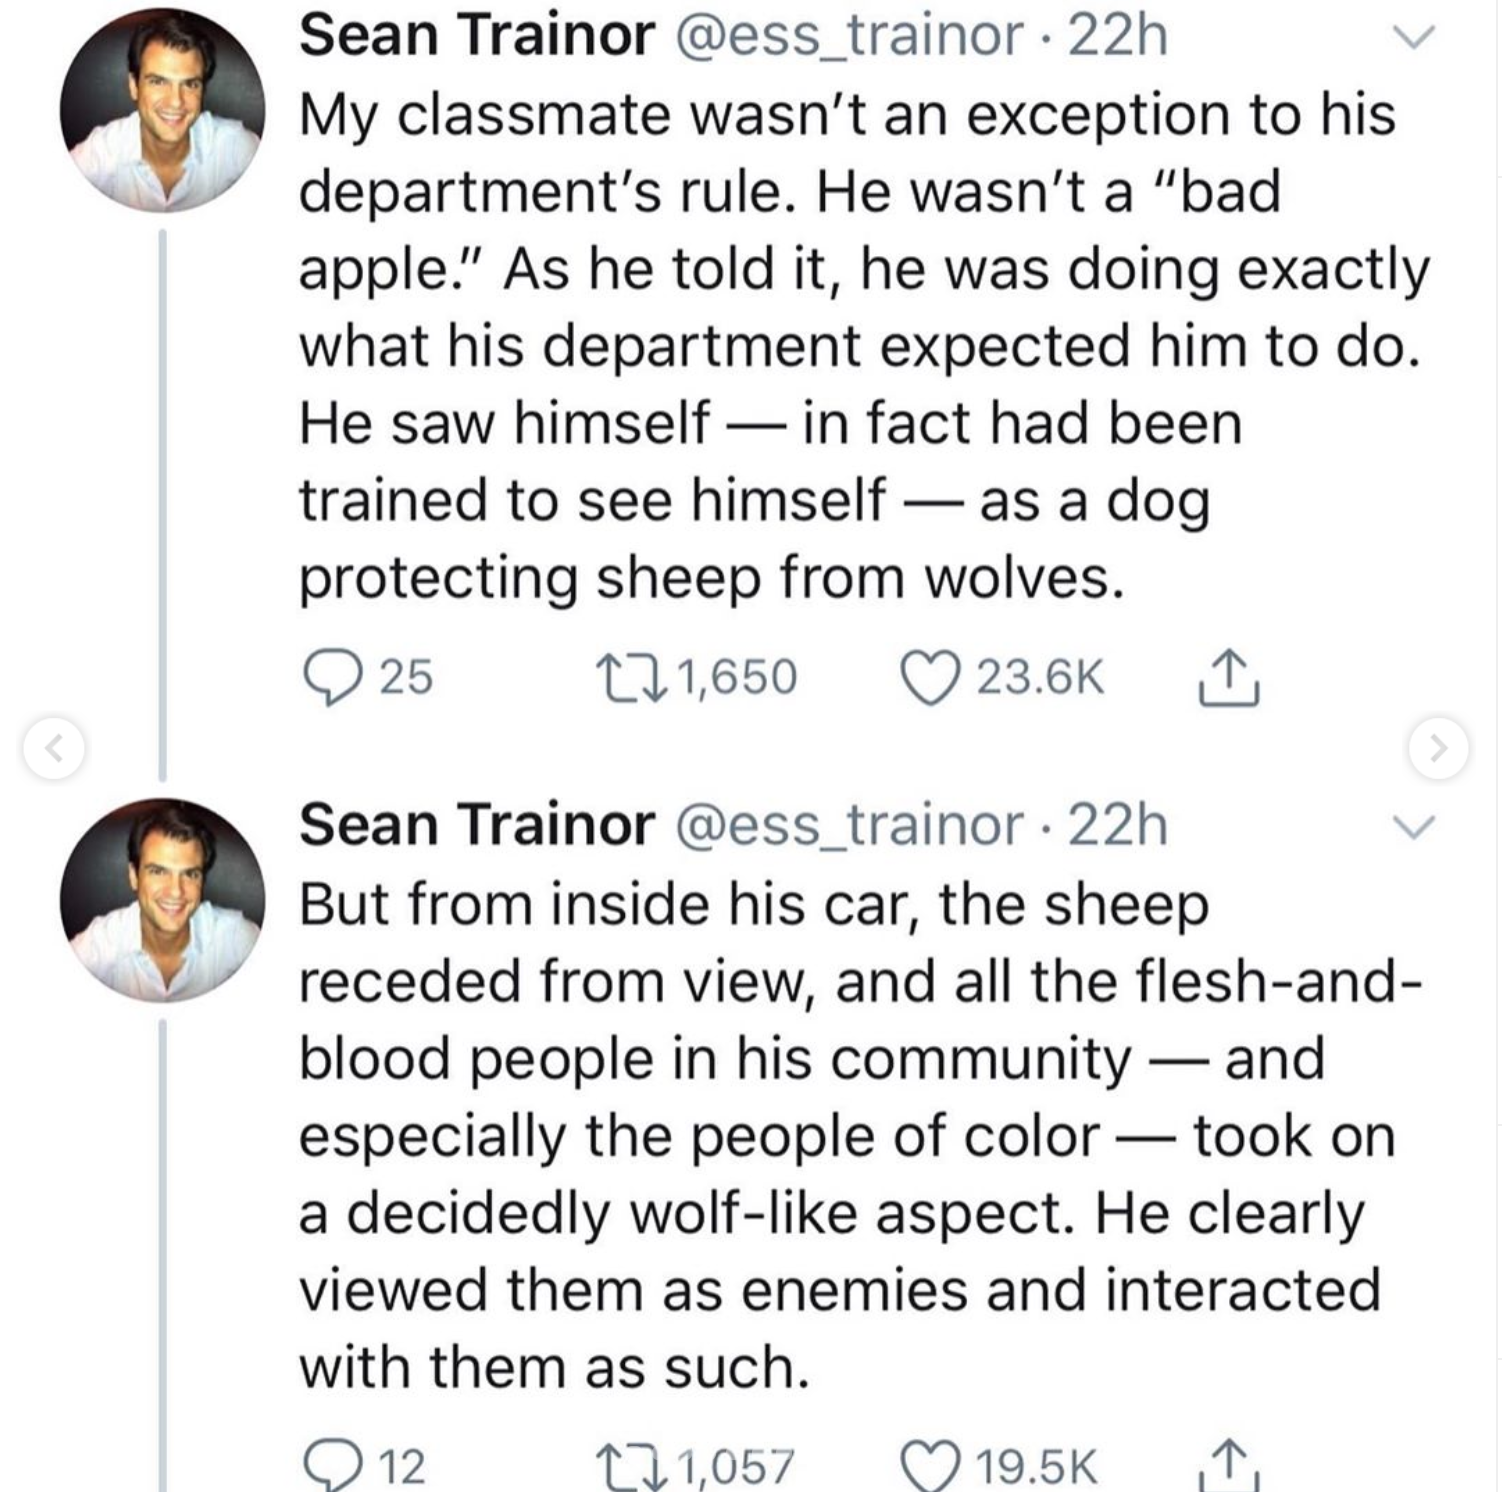 point - Sean Trainor 22h My classmate wasn't an exception to his department's rule. He wasn't a "bad apple." As he told it, he was doing exactly what his department expected him to do. He saw himself in fact had been trained to see himself as a dog protec